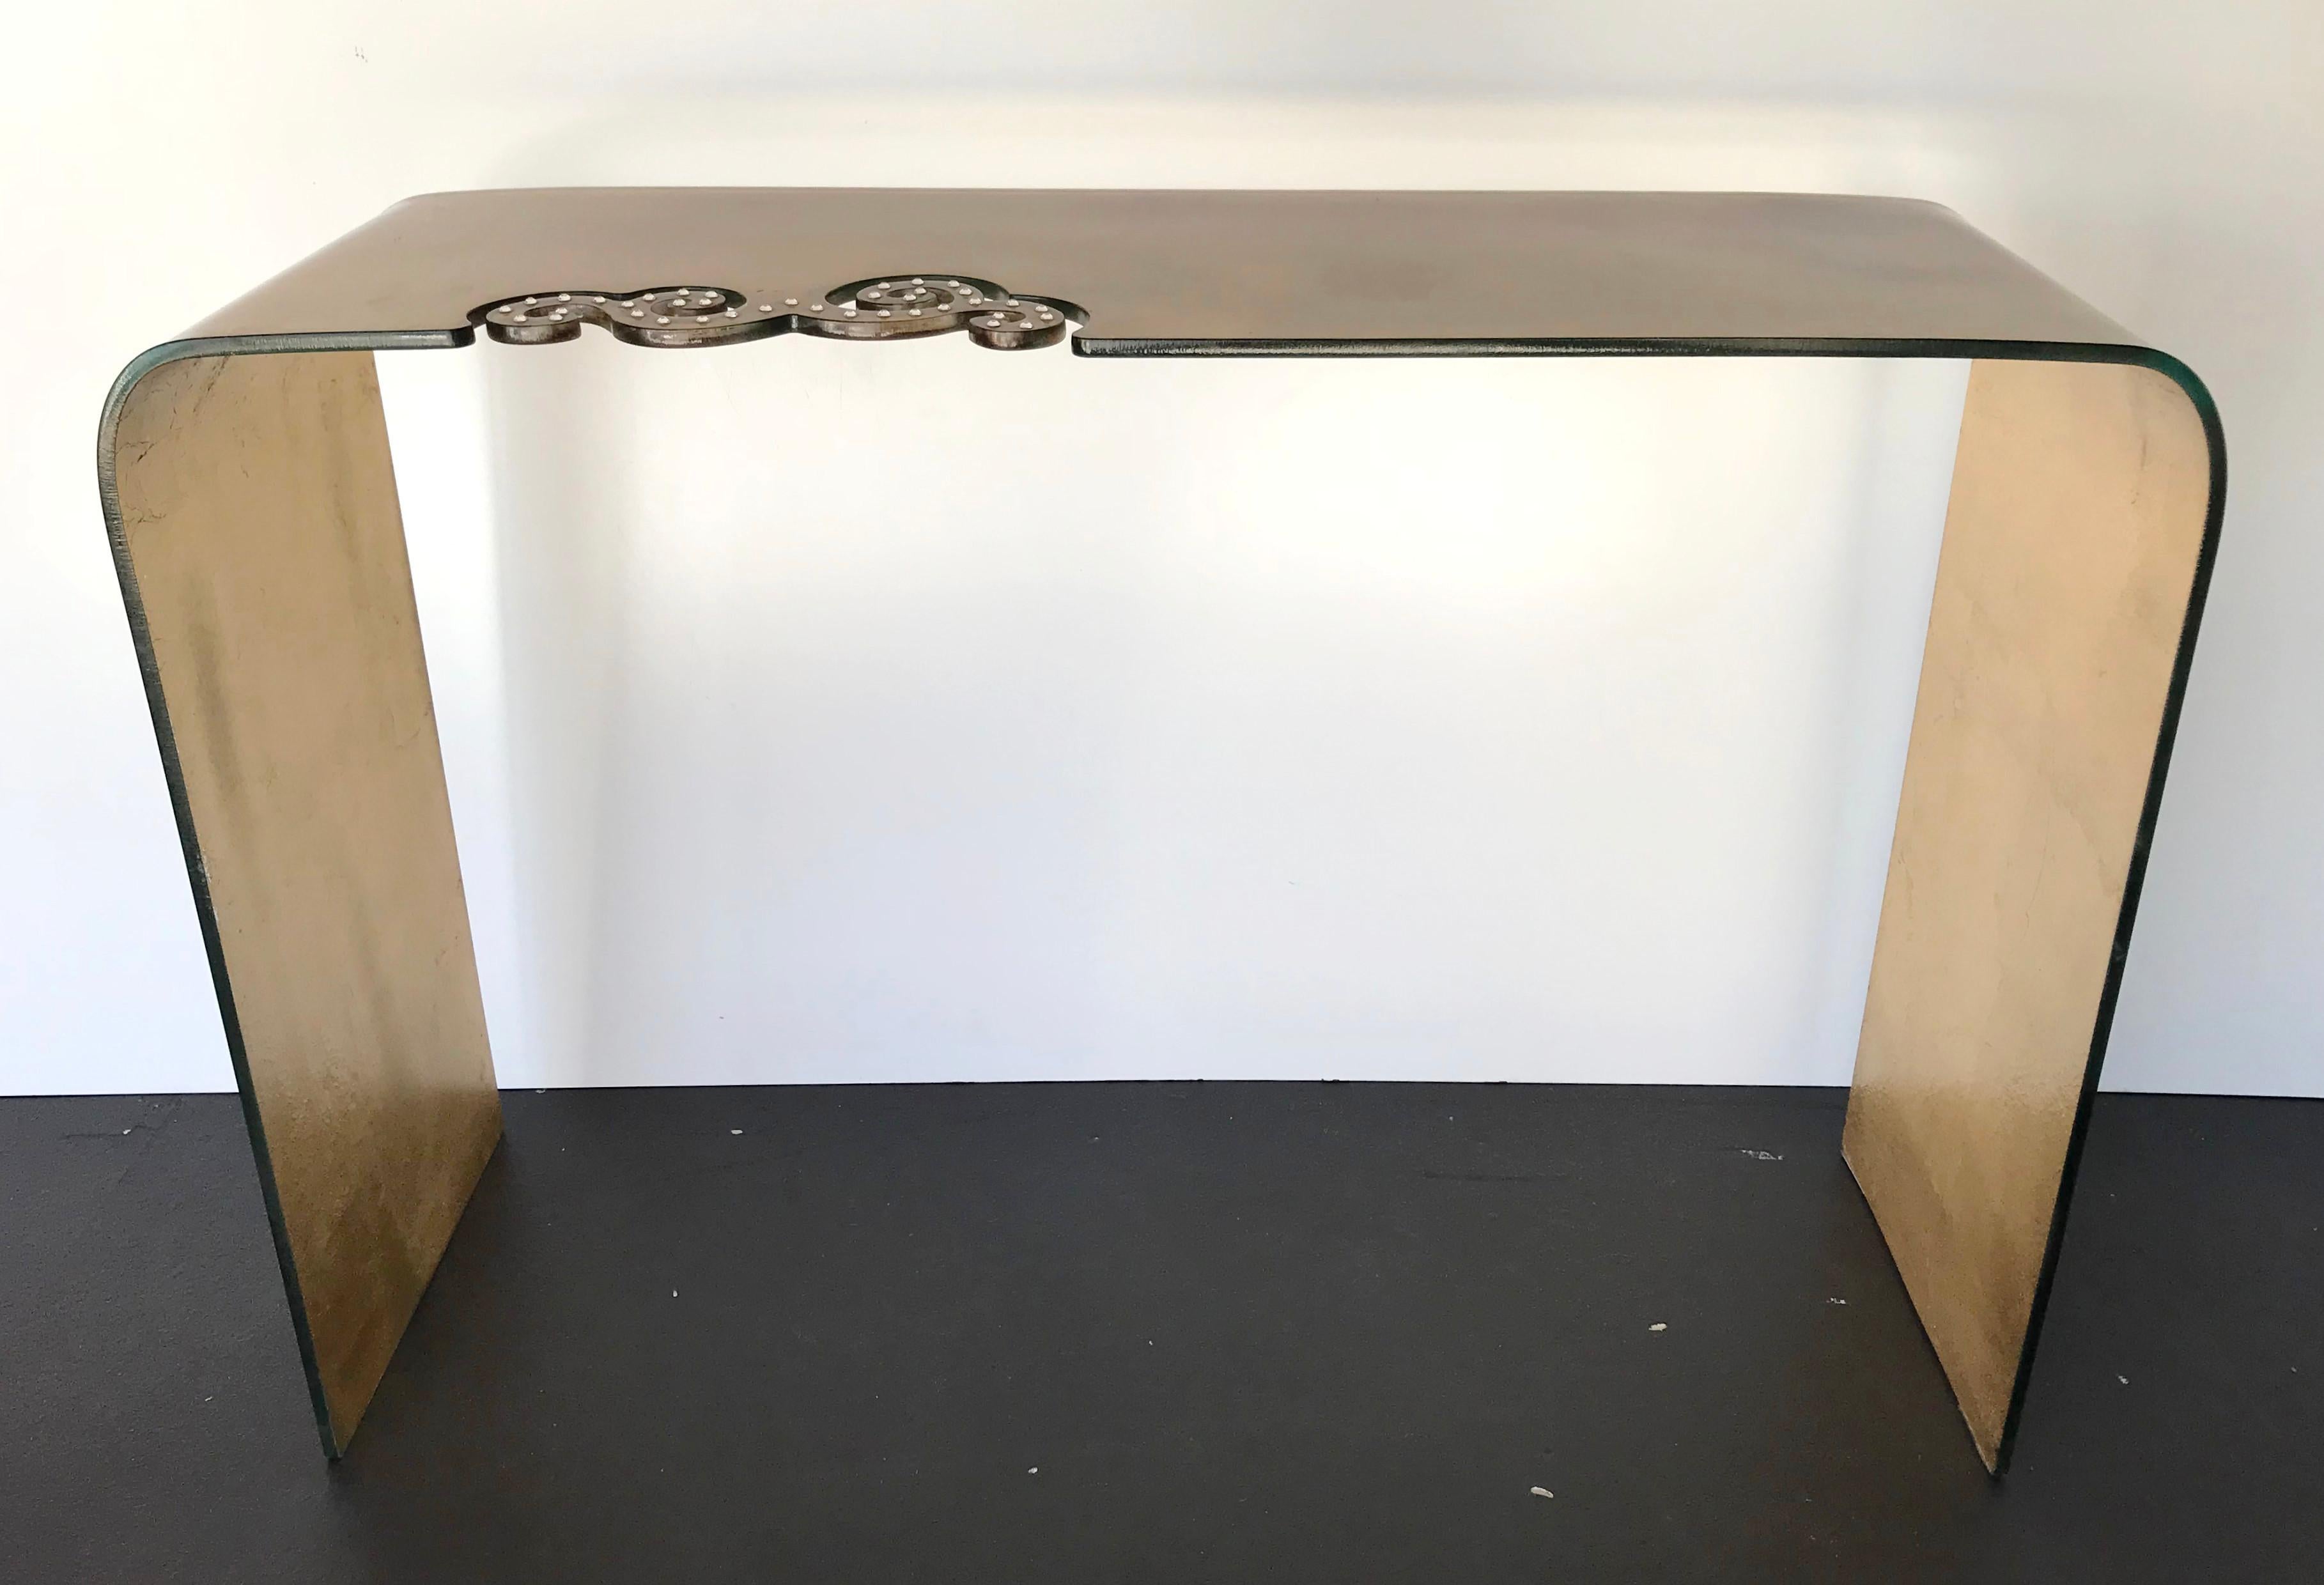 Italian glass console table decorated with Swarovski Strass crystals / Made in Italy in the 1980s
Measures: Height 28.5 inches / width 41.5 inches / depth 14 inches
1 in stock in Palm Springs ON FINAL CLEARANCE SALE for $899!!!
Order Reference #: